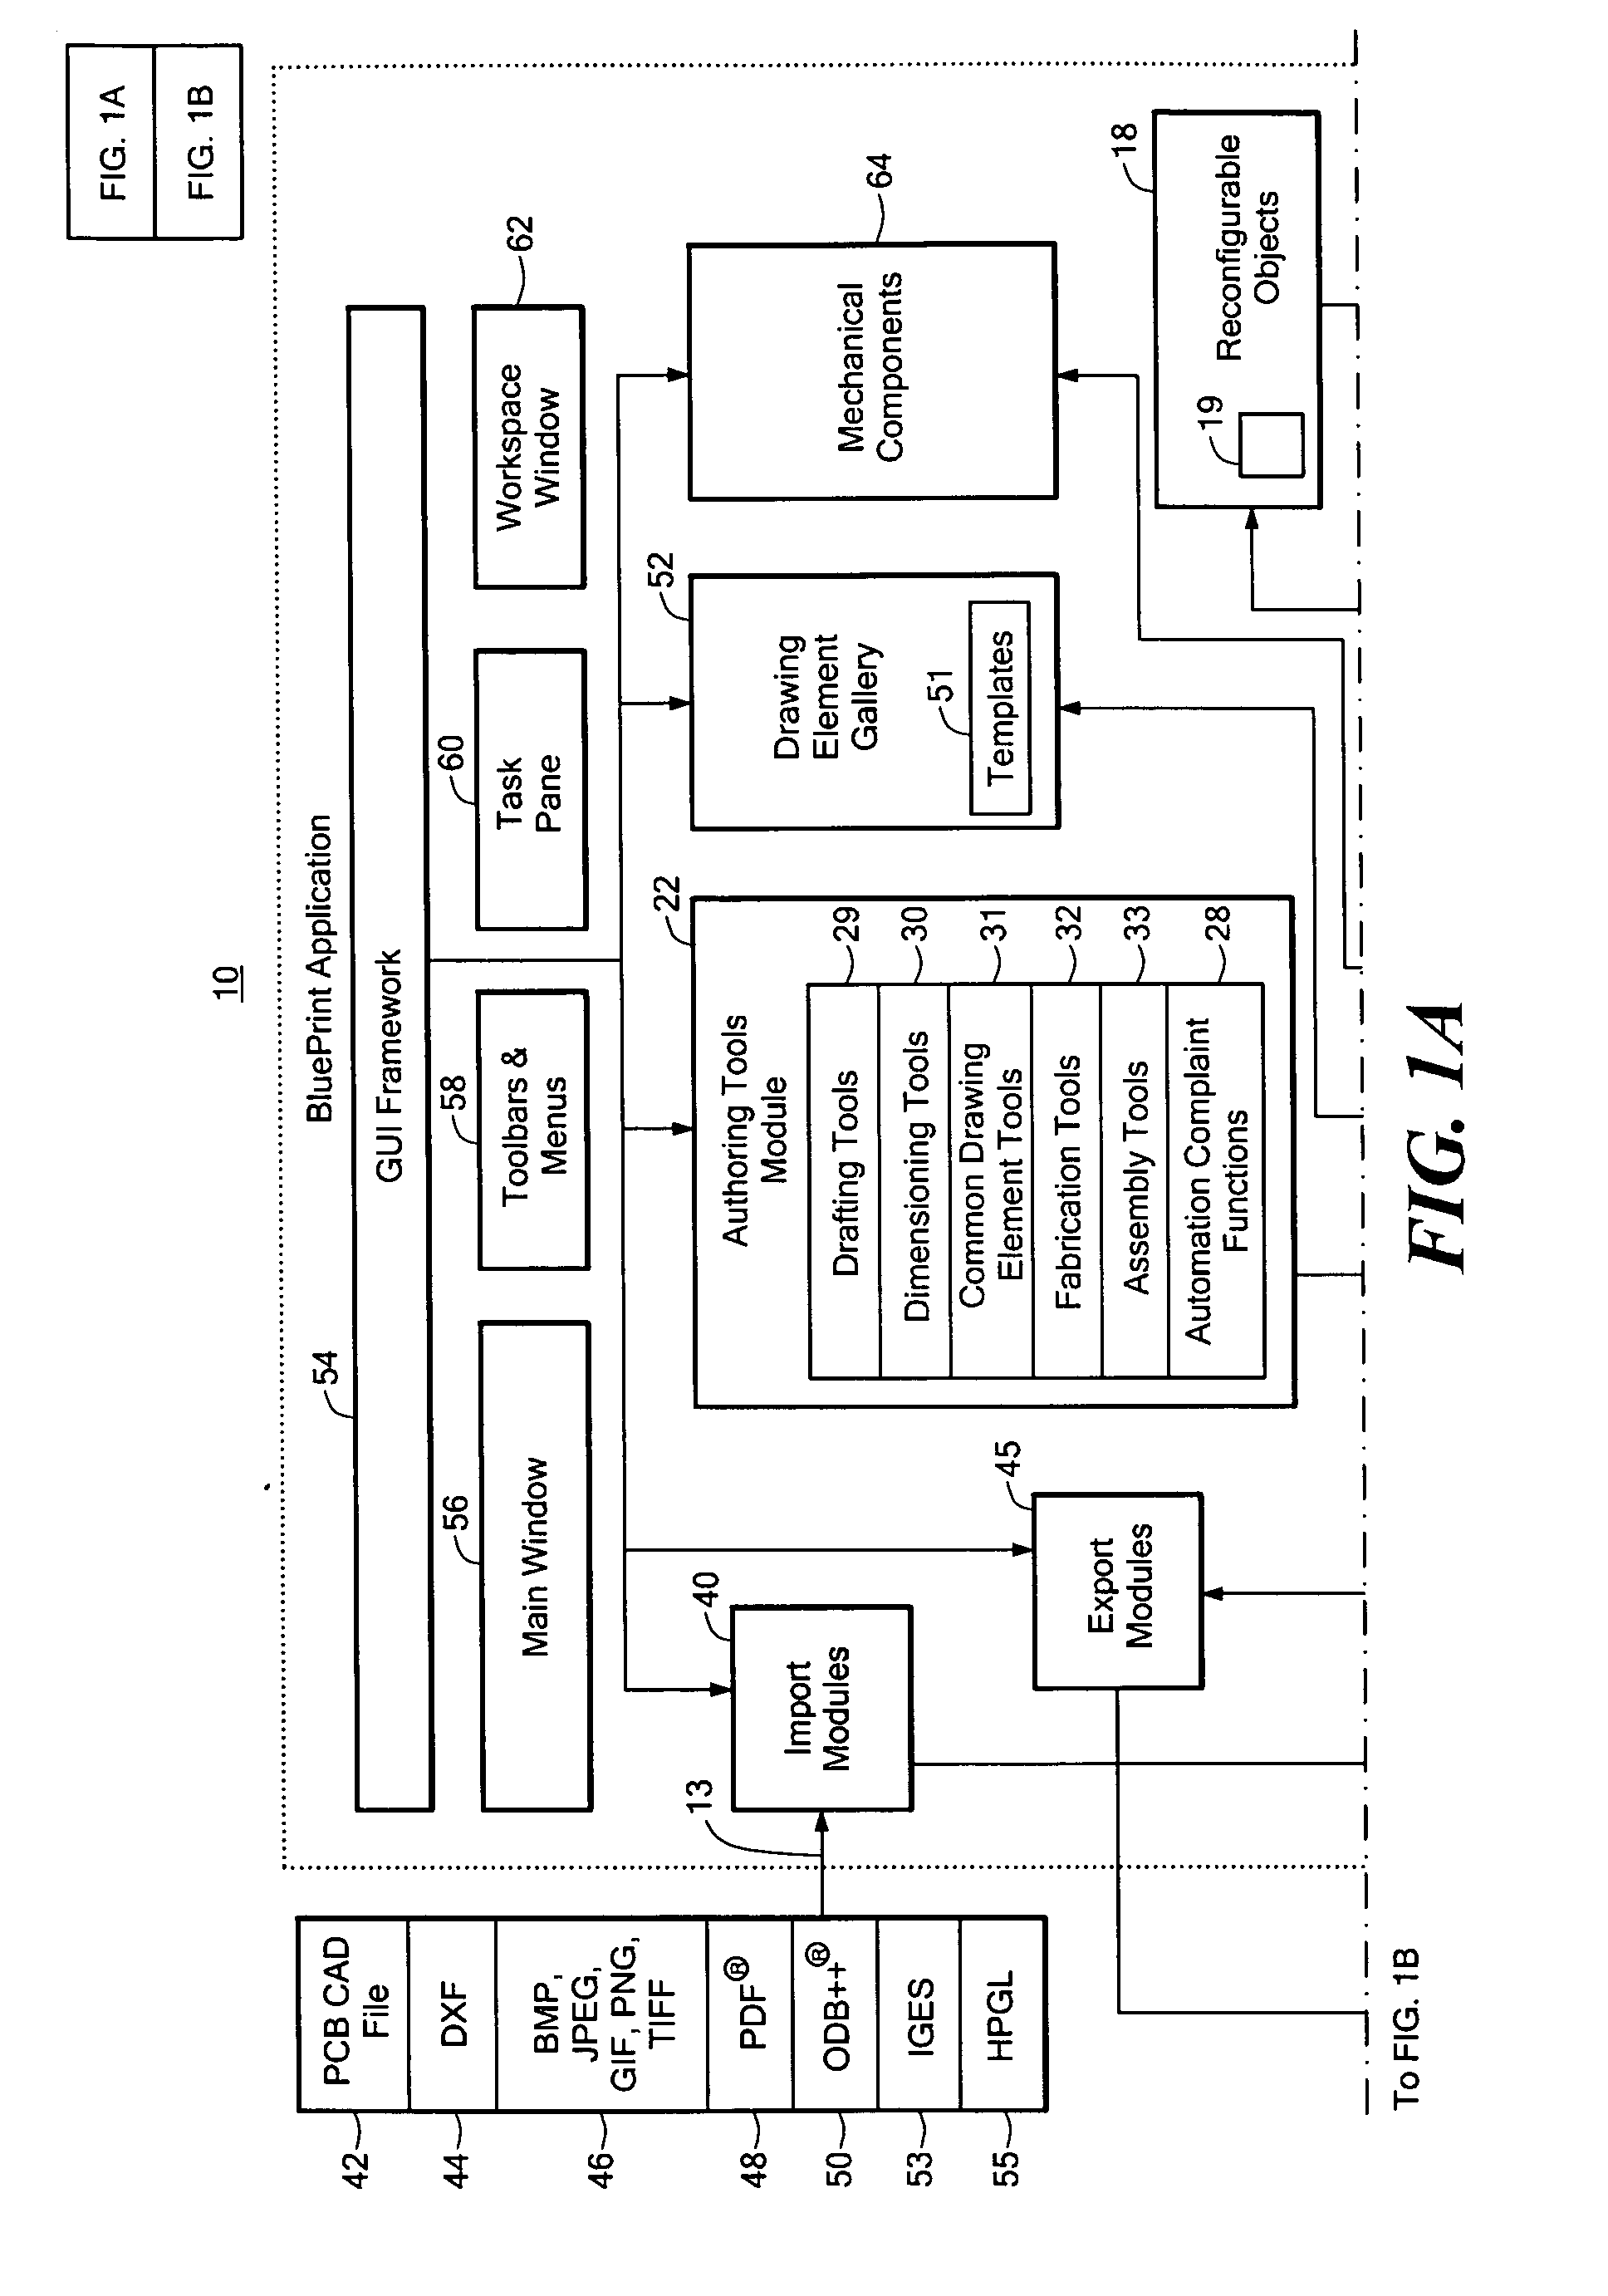 Automated PCB manufacturing documentation release package system and method